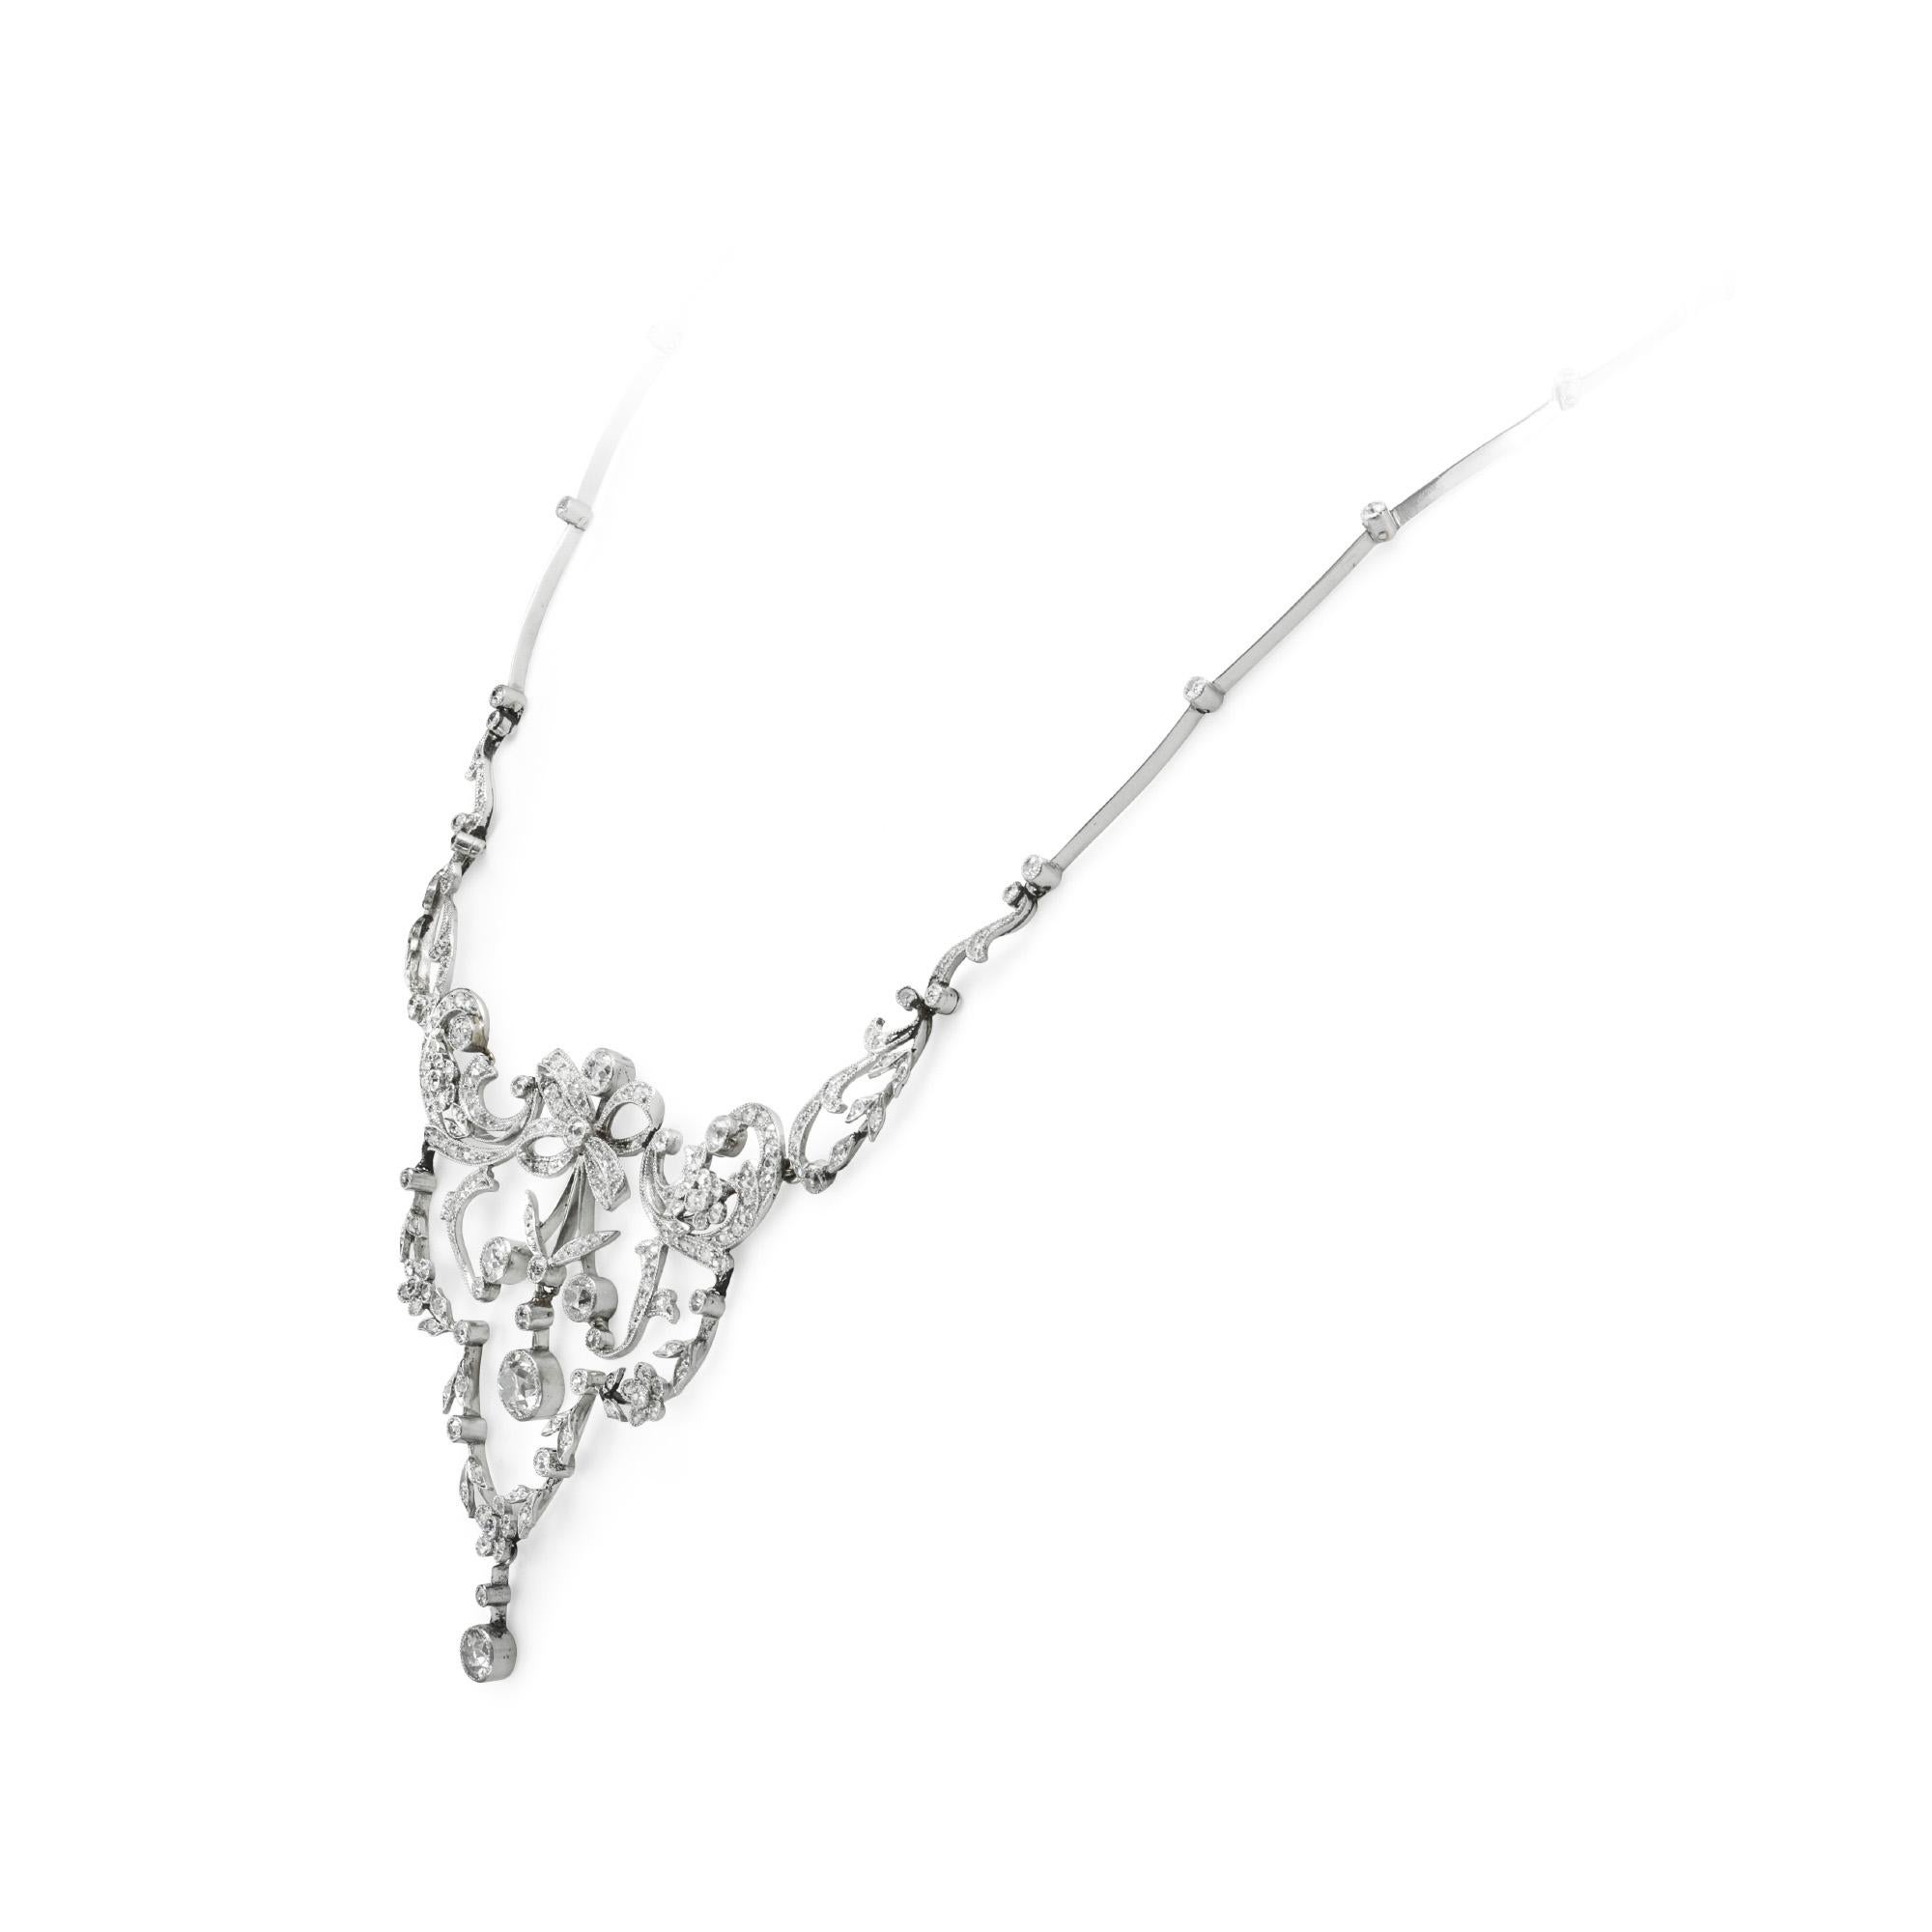 An Edwardian diamond necklace, the centre a diamond-set bow with diamond-set scroll, flower and foliate detail either side, suspending a garland of flowers and leaves surrounding an old round brilliant-cut diamond, all millegrain set, attached